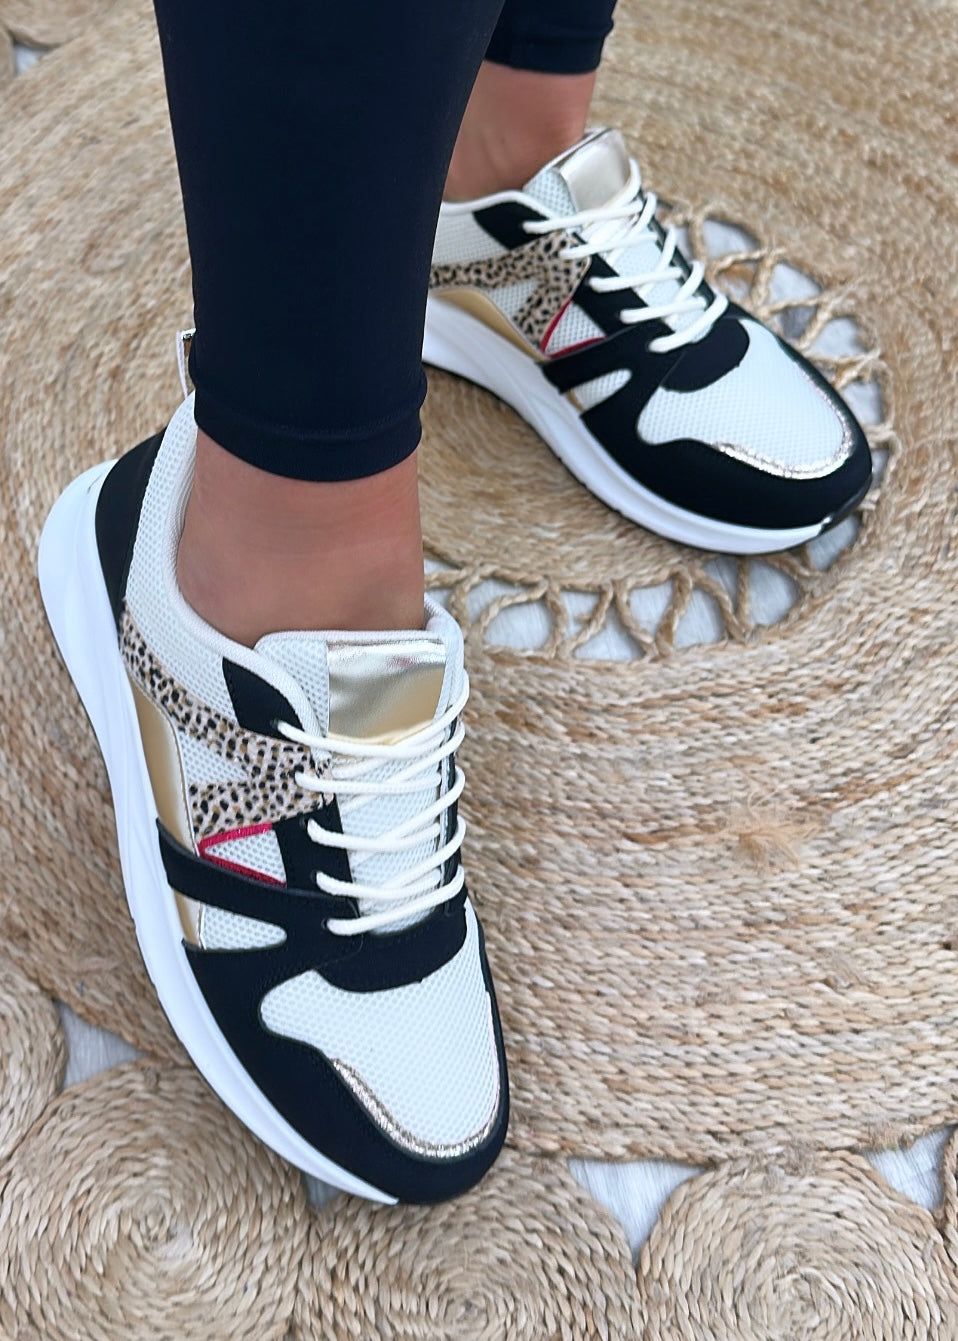 Gracie Black Lace Up Trainers